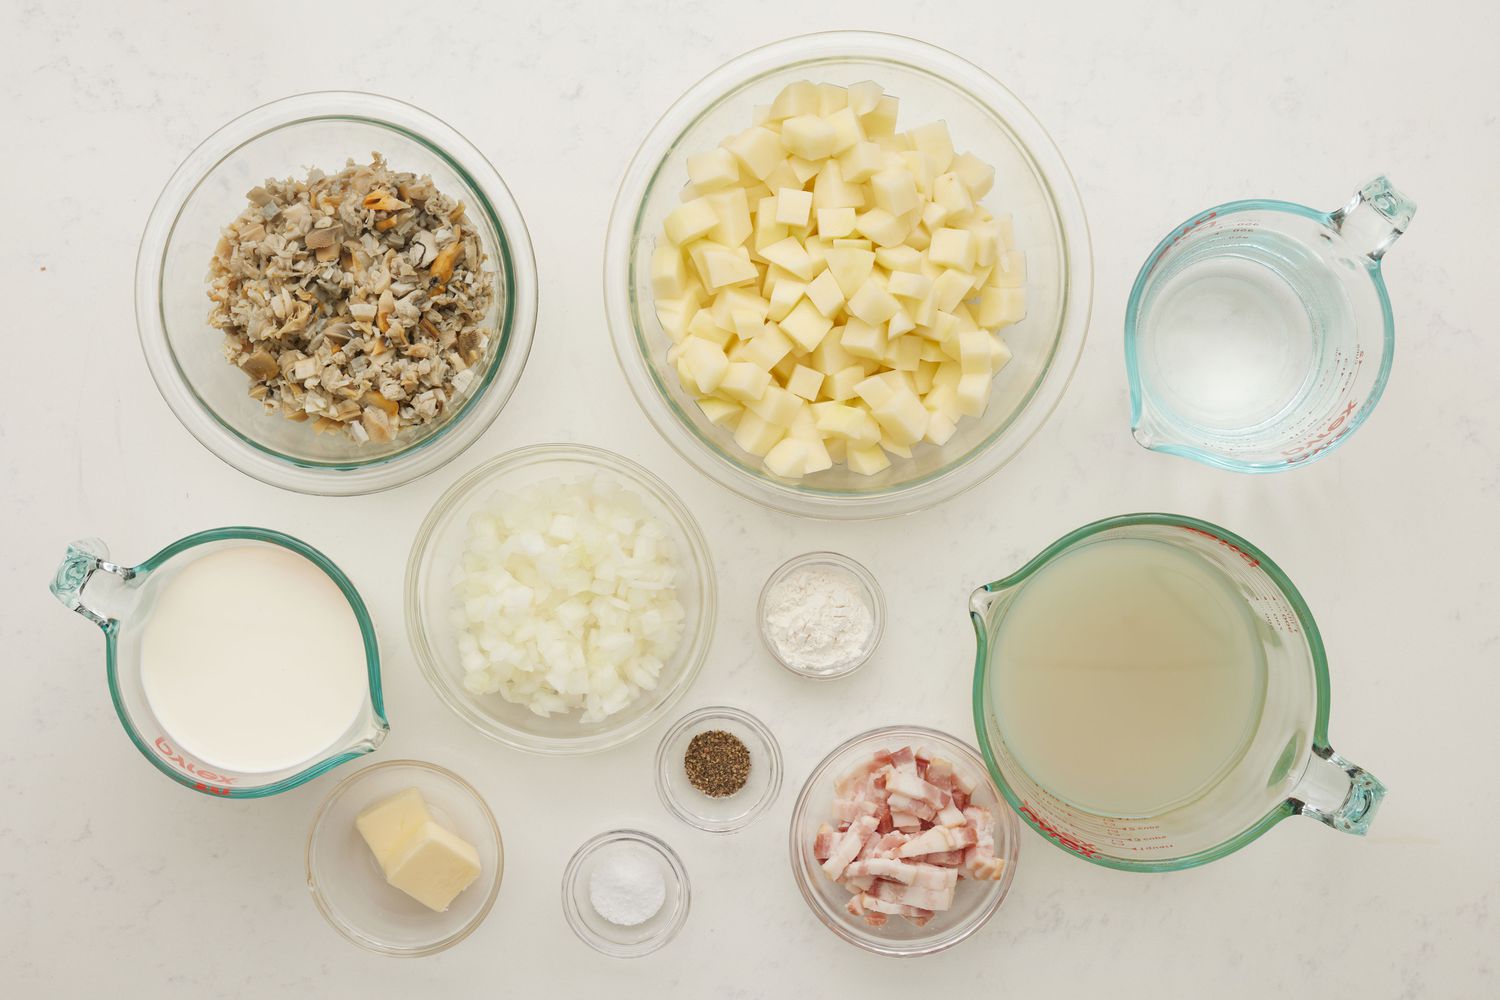 Ingredients to make New England clam chowder